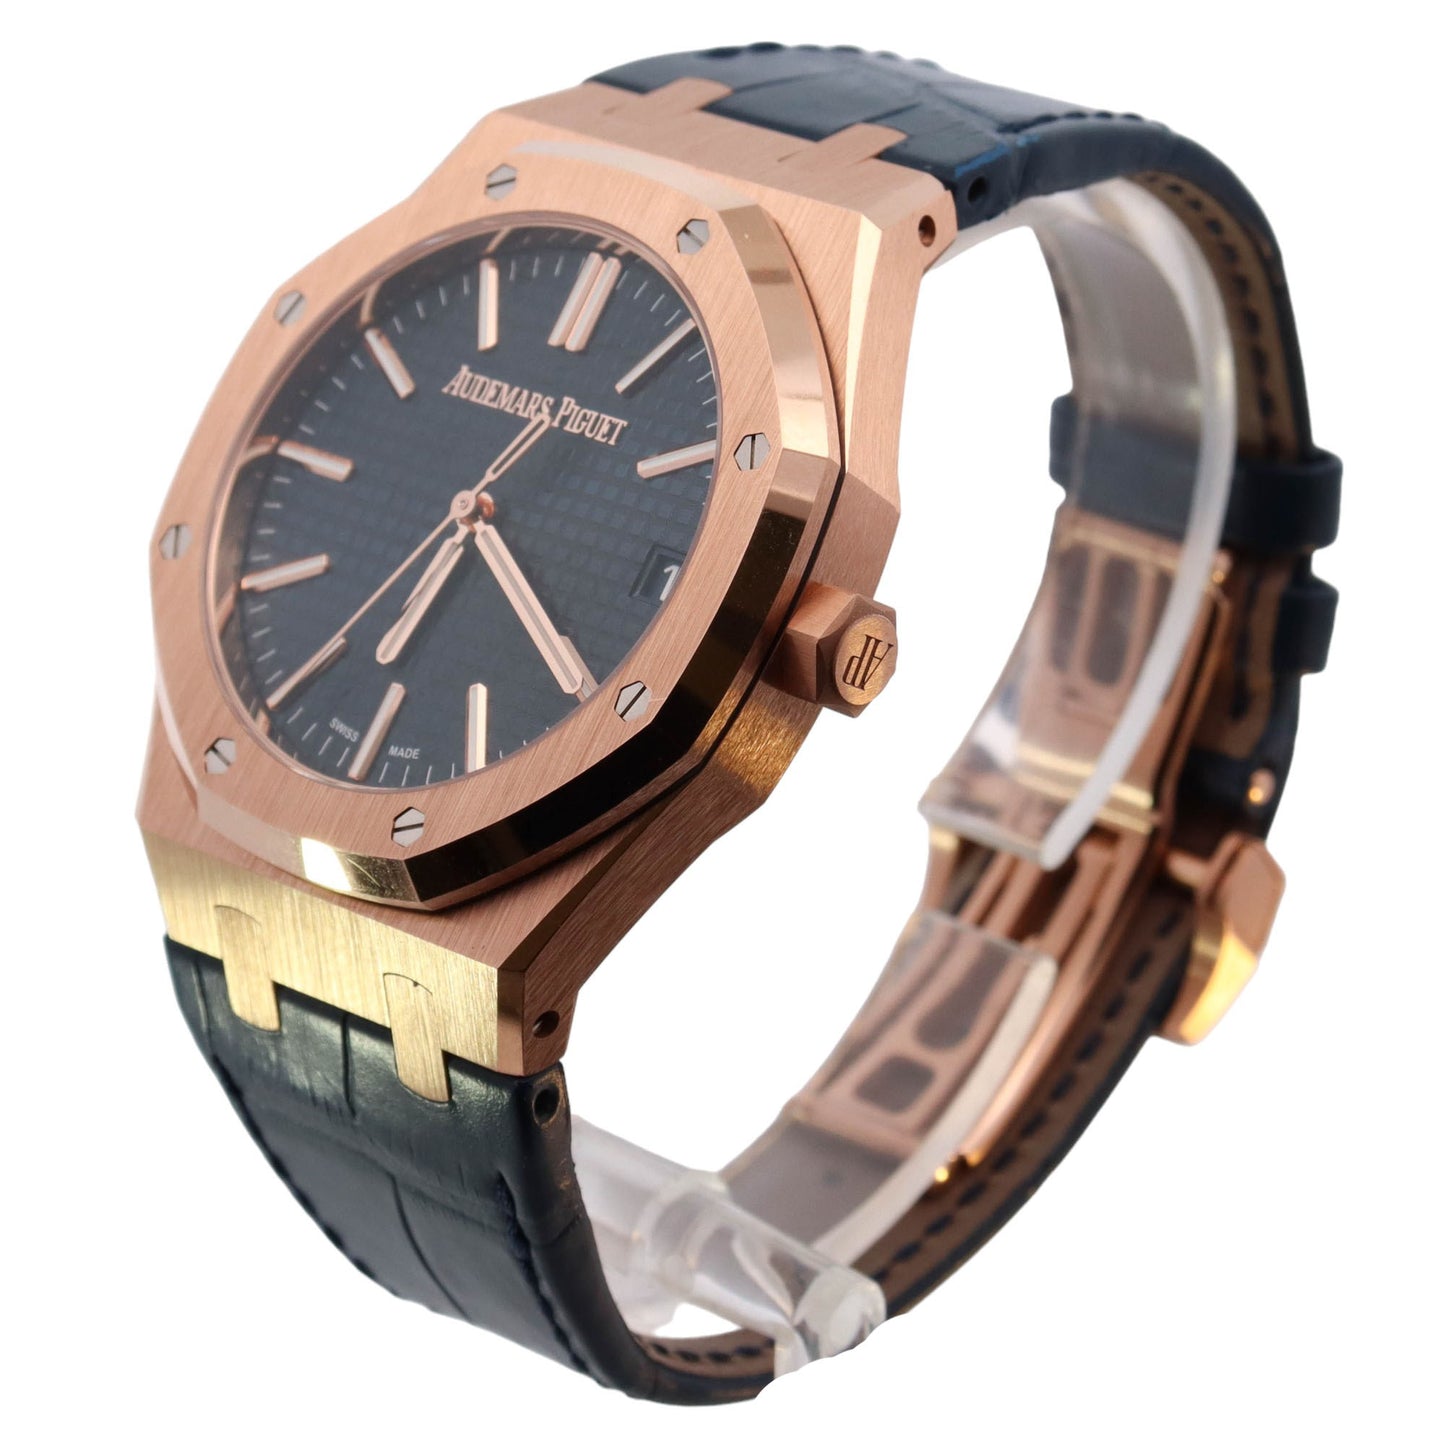 Audemars Piguet Royal Oak Rose Gold 41mm Blue Stick Dial Watch Reference# 15510OR.OO.D315CR.02 - Happy Jewelers Fine Jewelry Lifetime Warranty